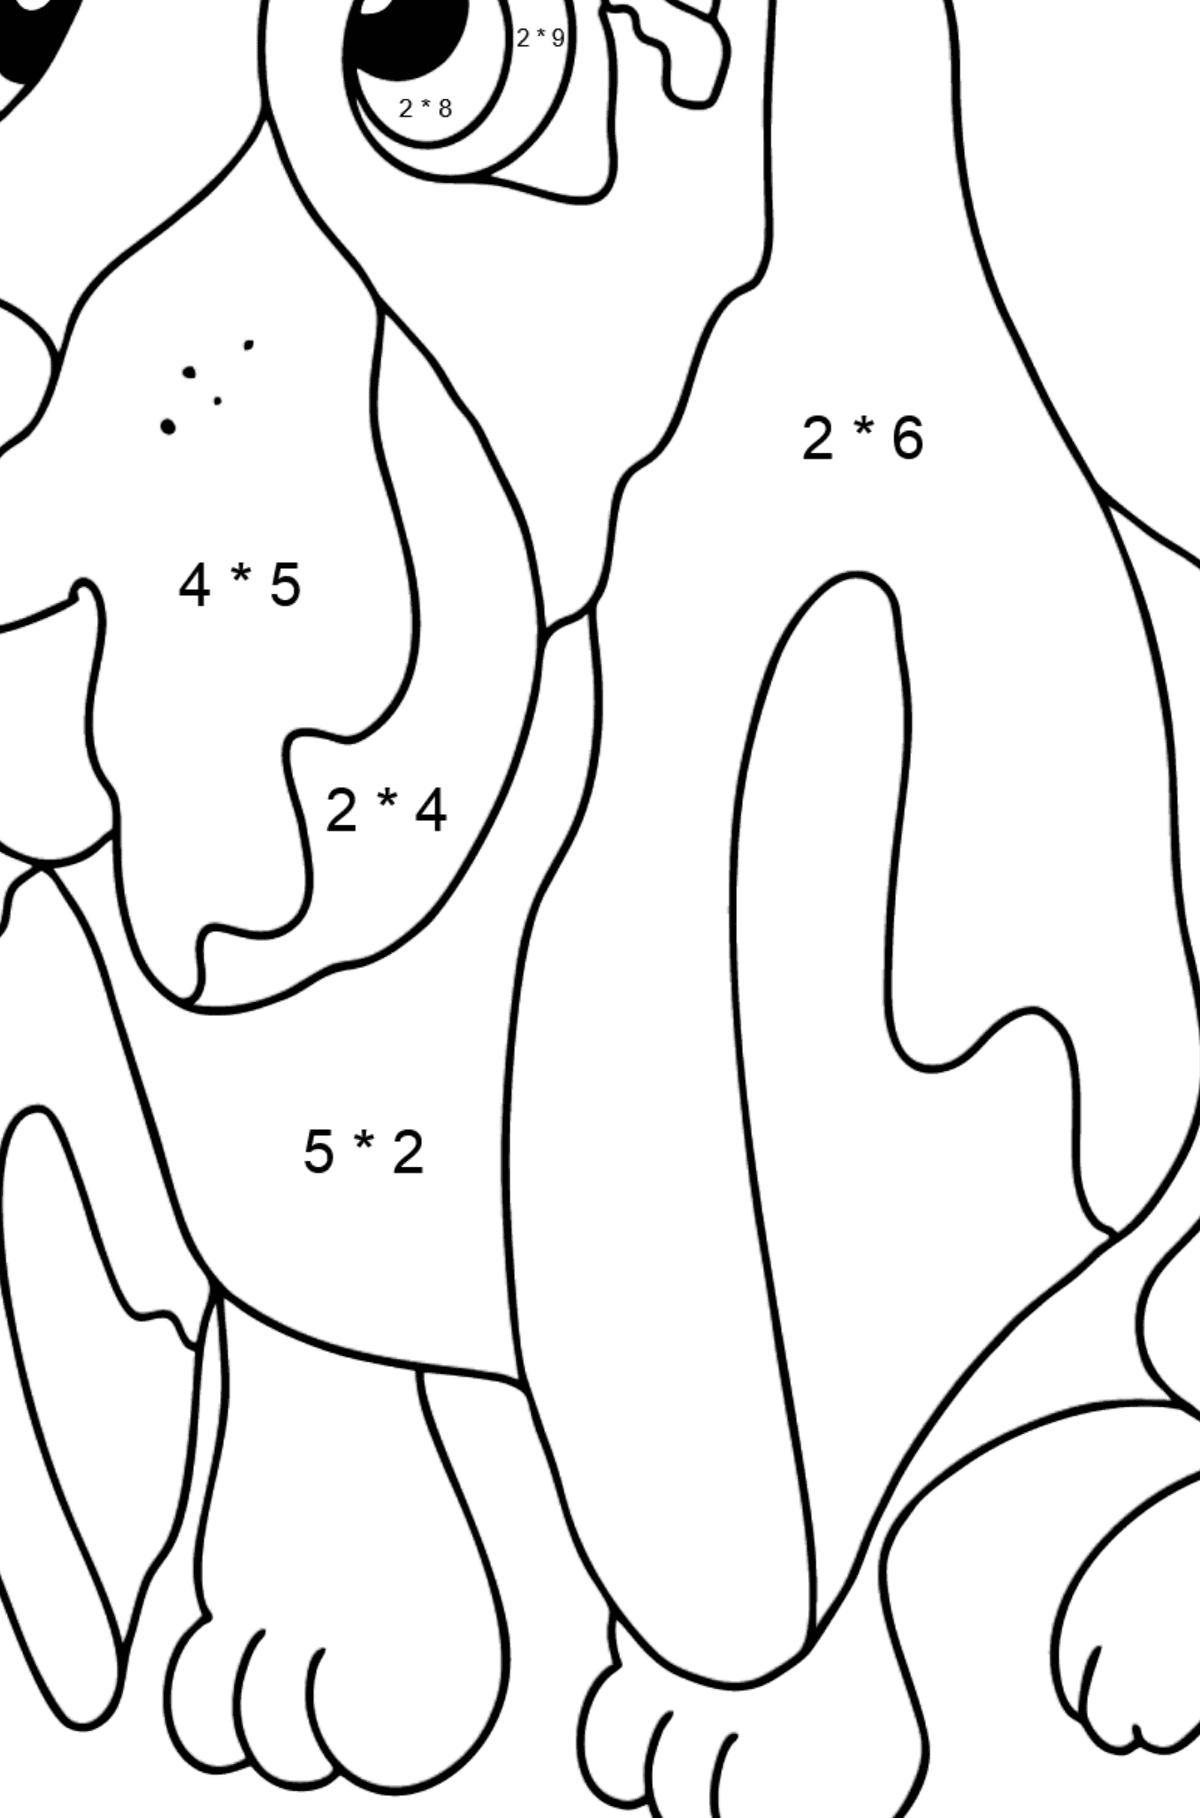 Coloring Page - A Dog is Sitting near a Bone - Math Coloring - Multiplication for Kids